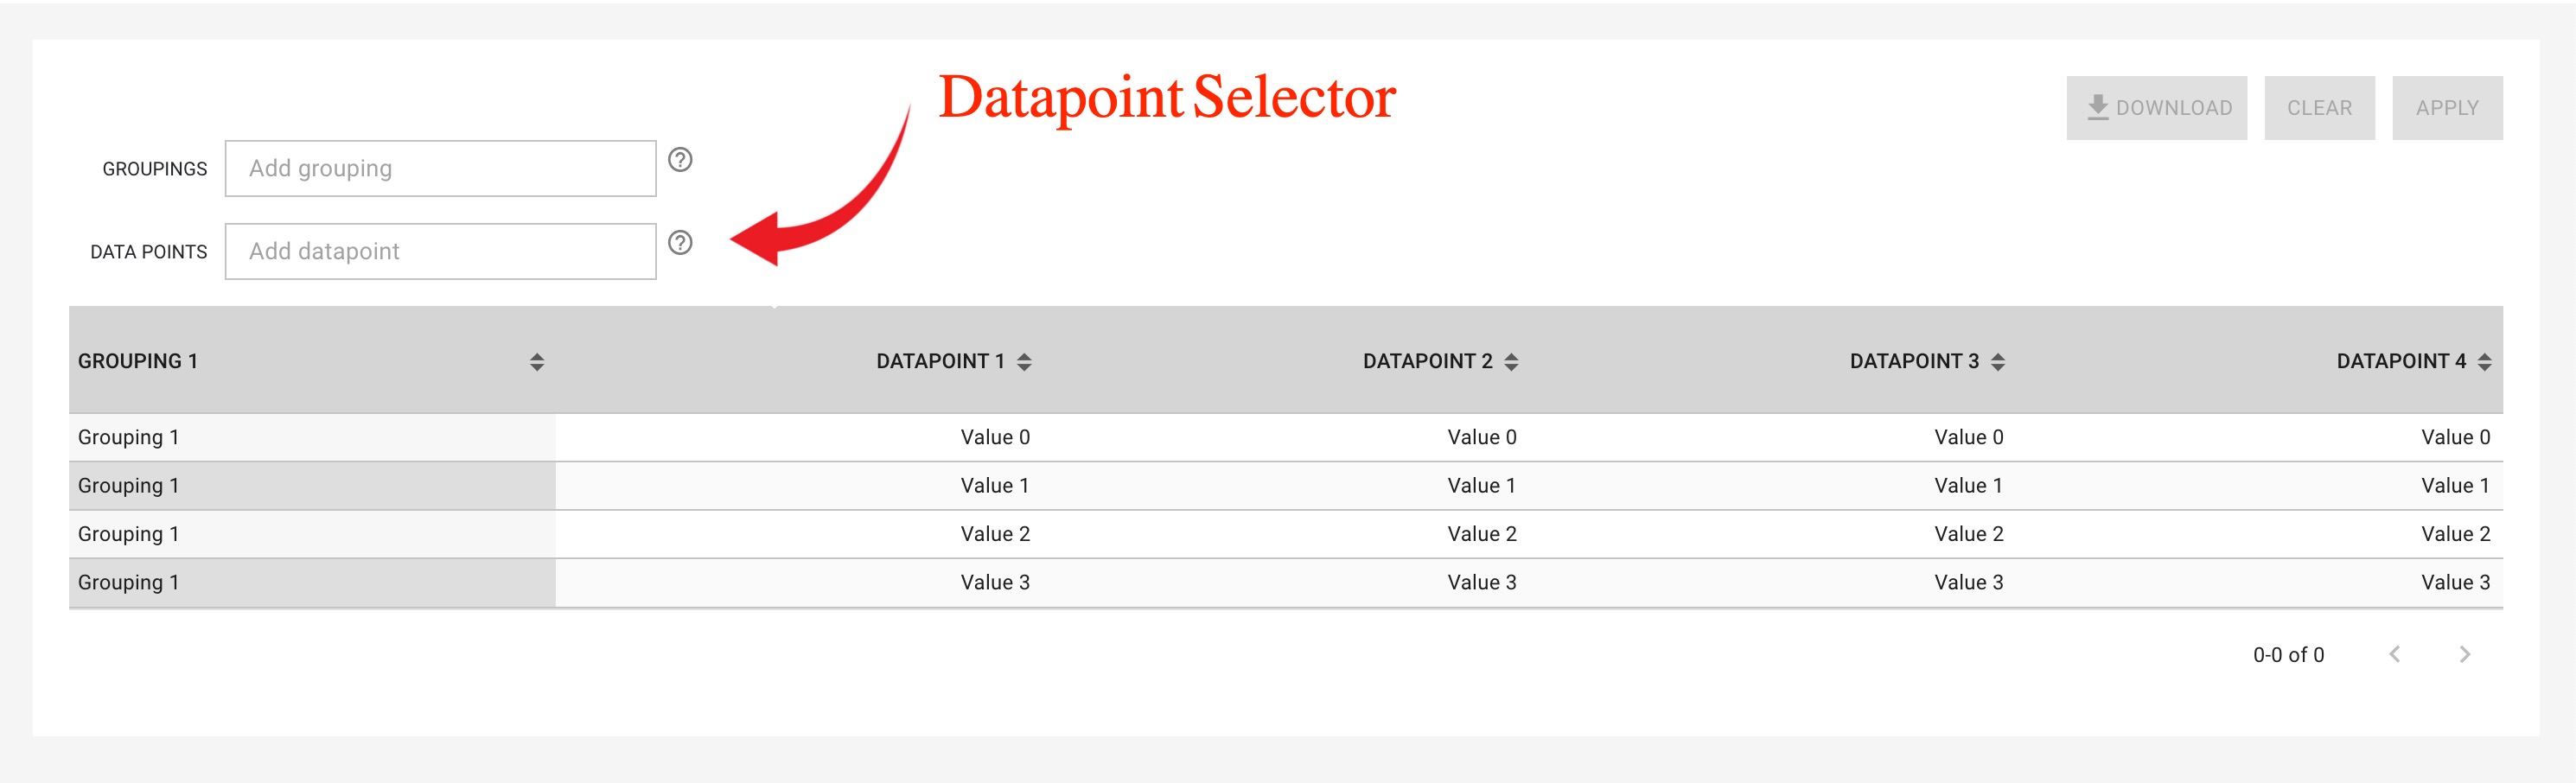 Data Point Selector